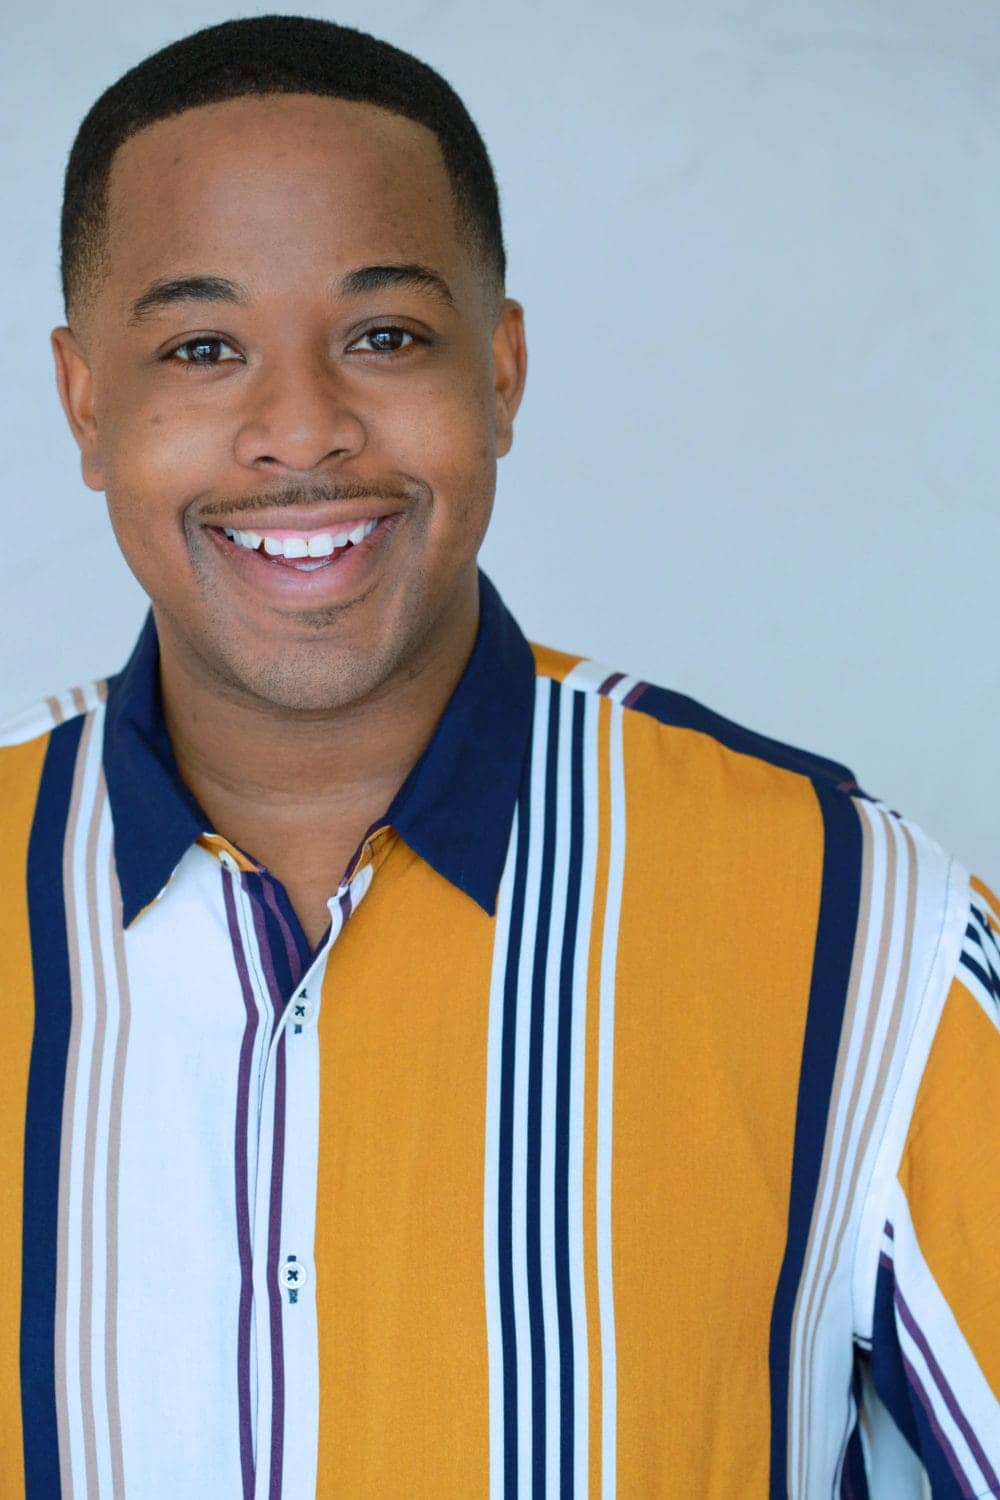 Devin-Cunningham, Oakland’s Devin Cunningham directs African-American Shakespeare’s ‘Cinderella’ Dec. 4-18 in San Francisco, Culture Currents Local News & Views 